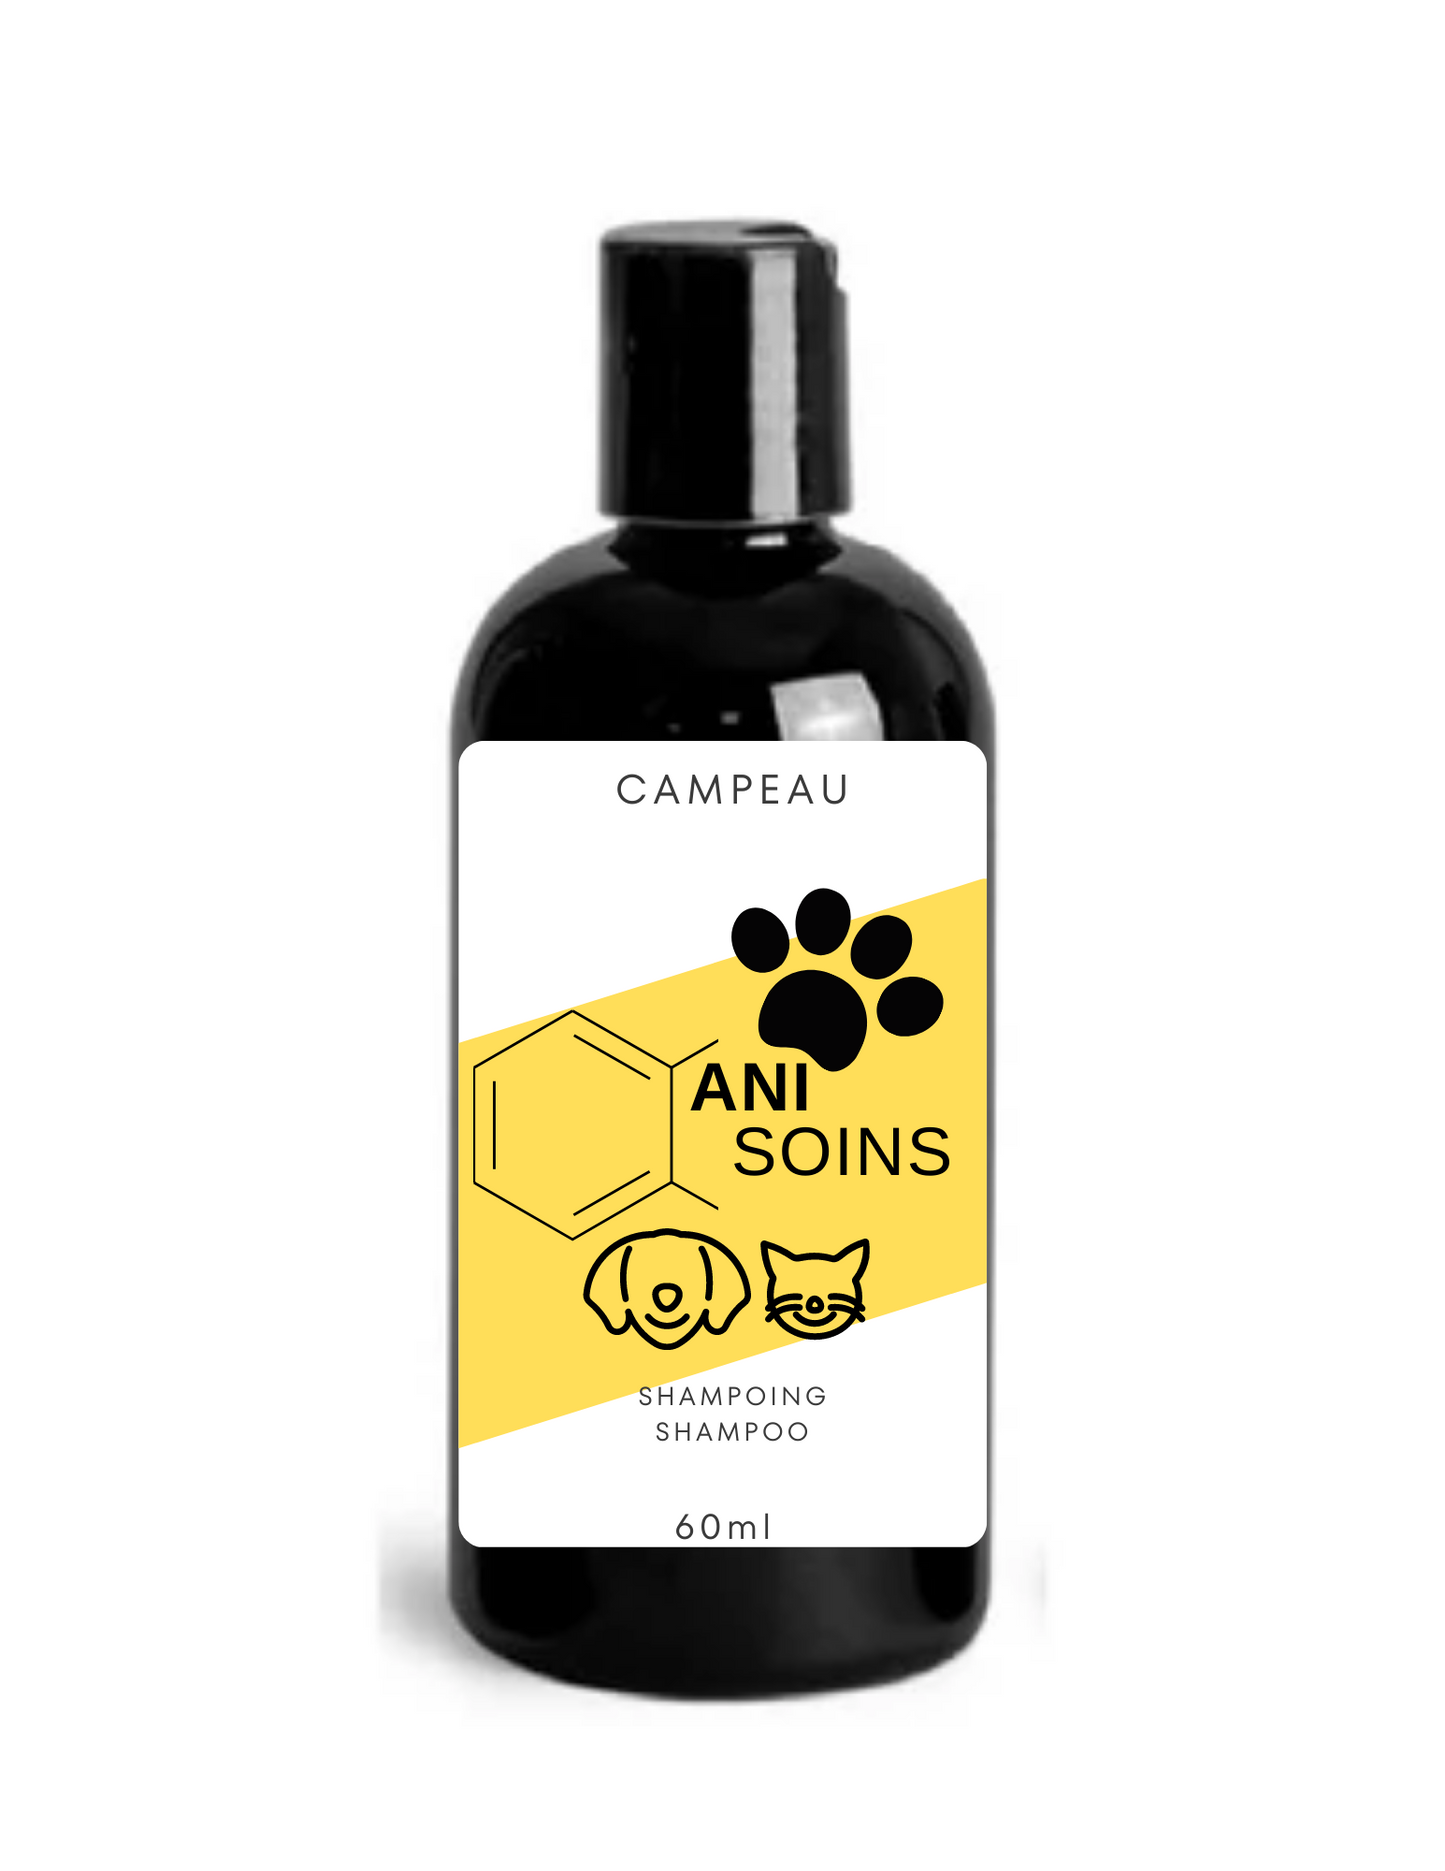 ANI Soins shampoing pour animaux de compagnie